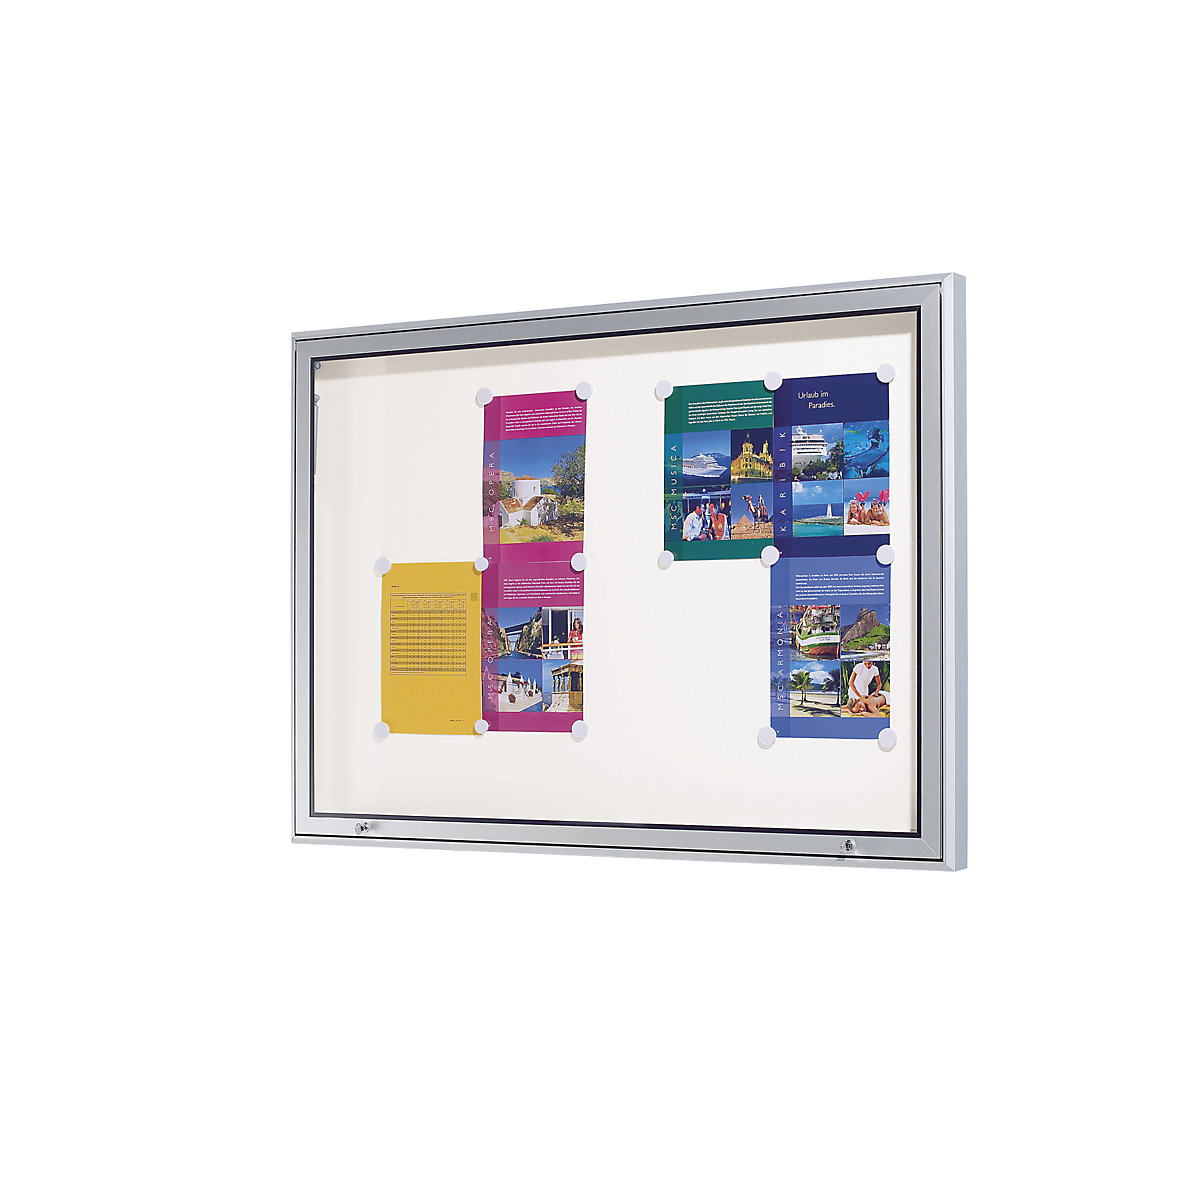 Display case, aluminium frame, for indoor and outdoor use – eurokraft pro